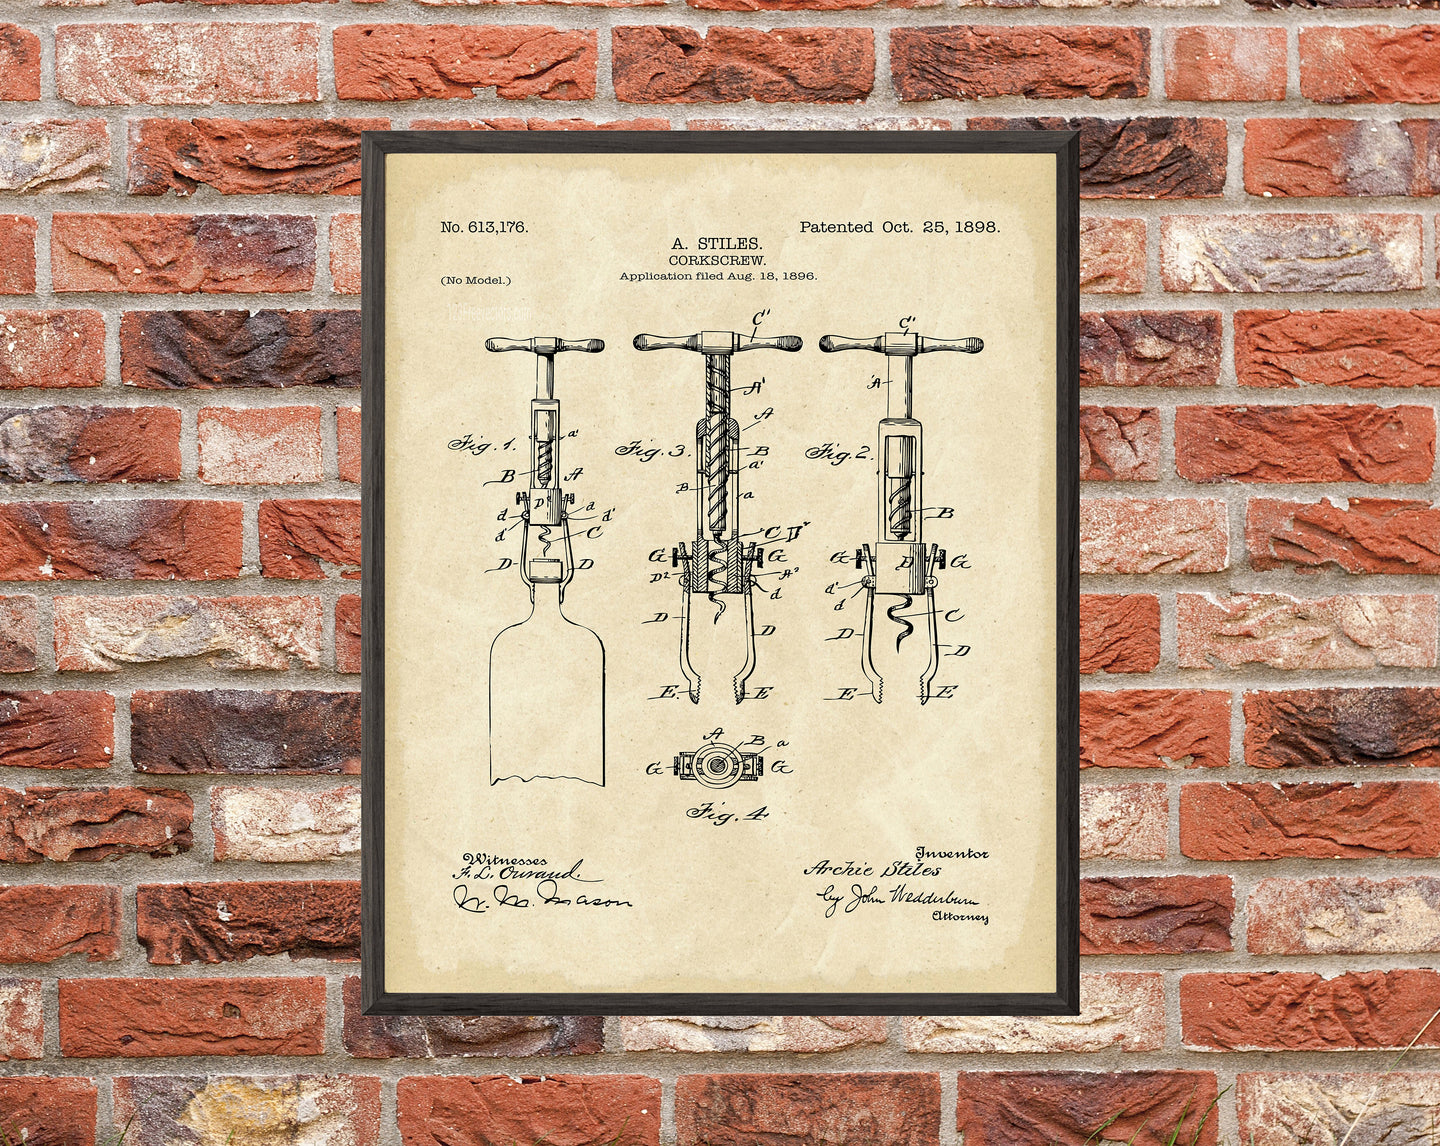 Corkscrew Patent Print - Digital Download - 7 Different Backgrounds Included